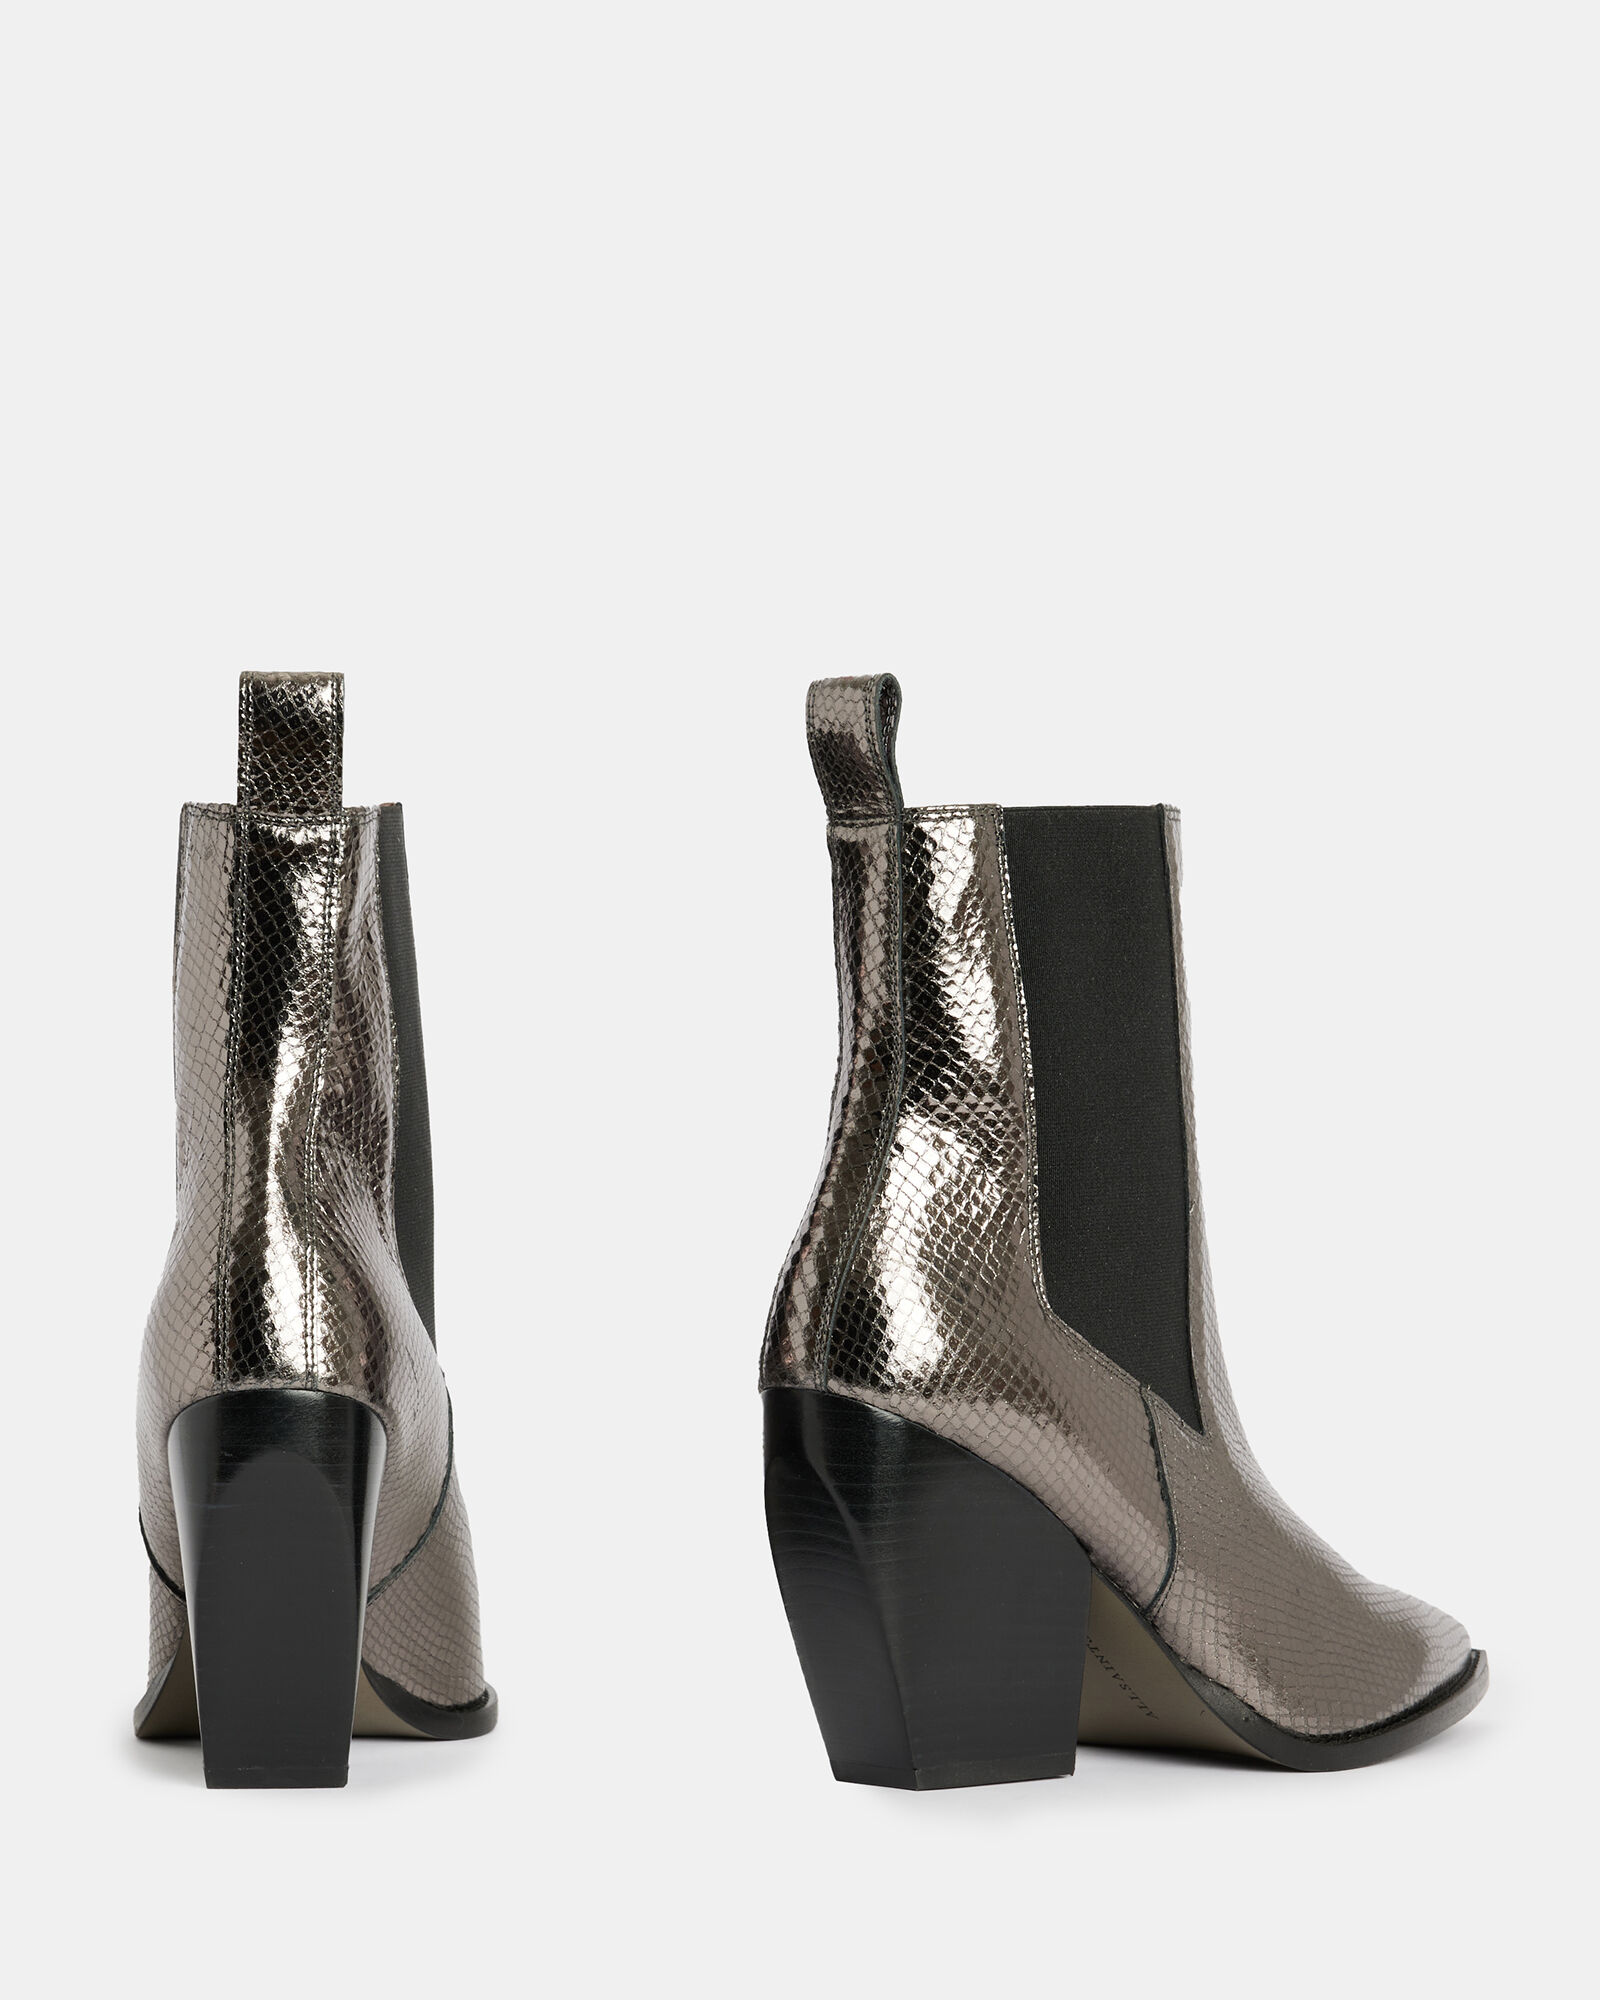 P.A.R.O.S.H. snakeskin-effect leather boots - Metallic